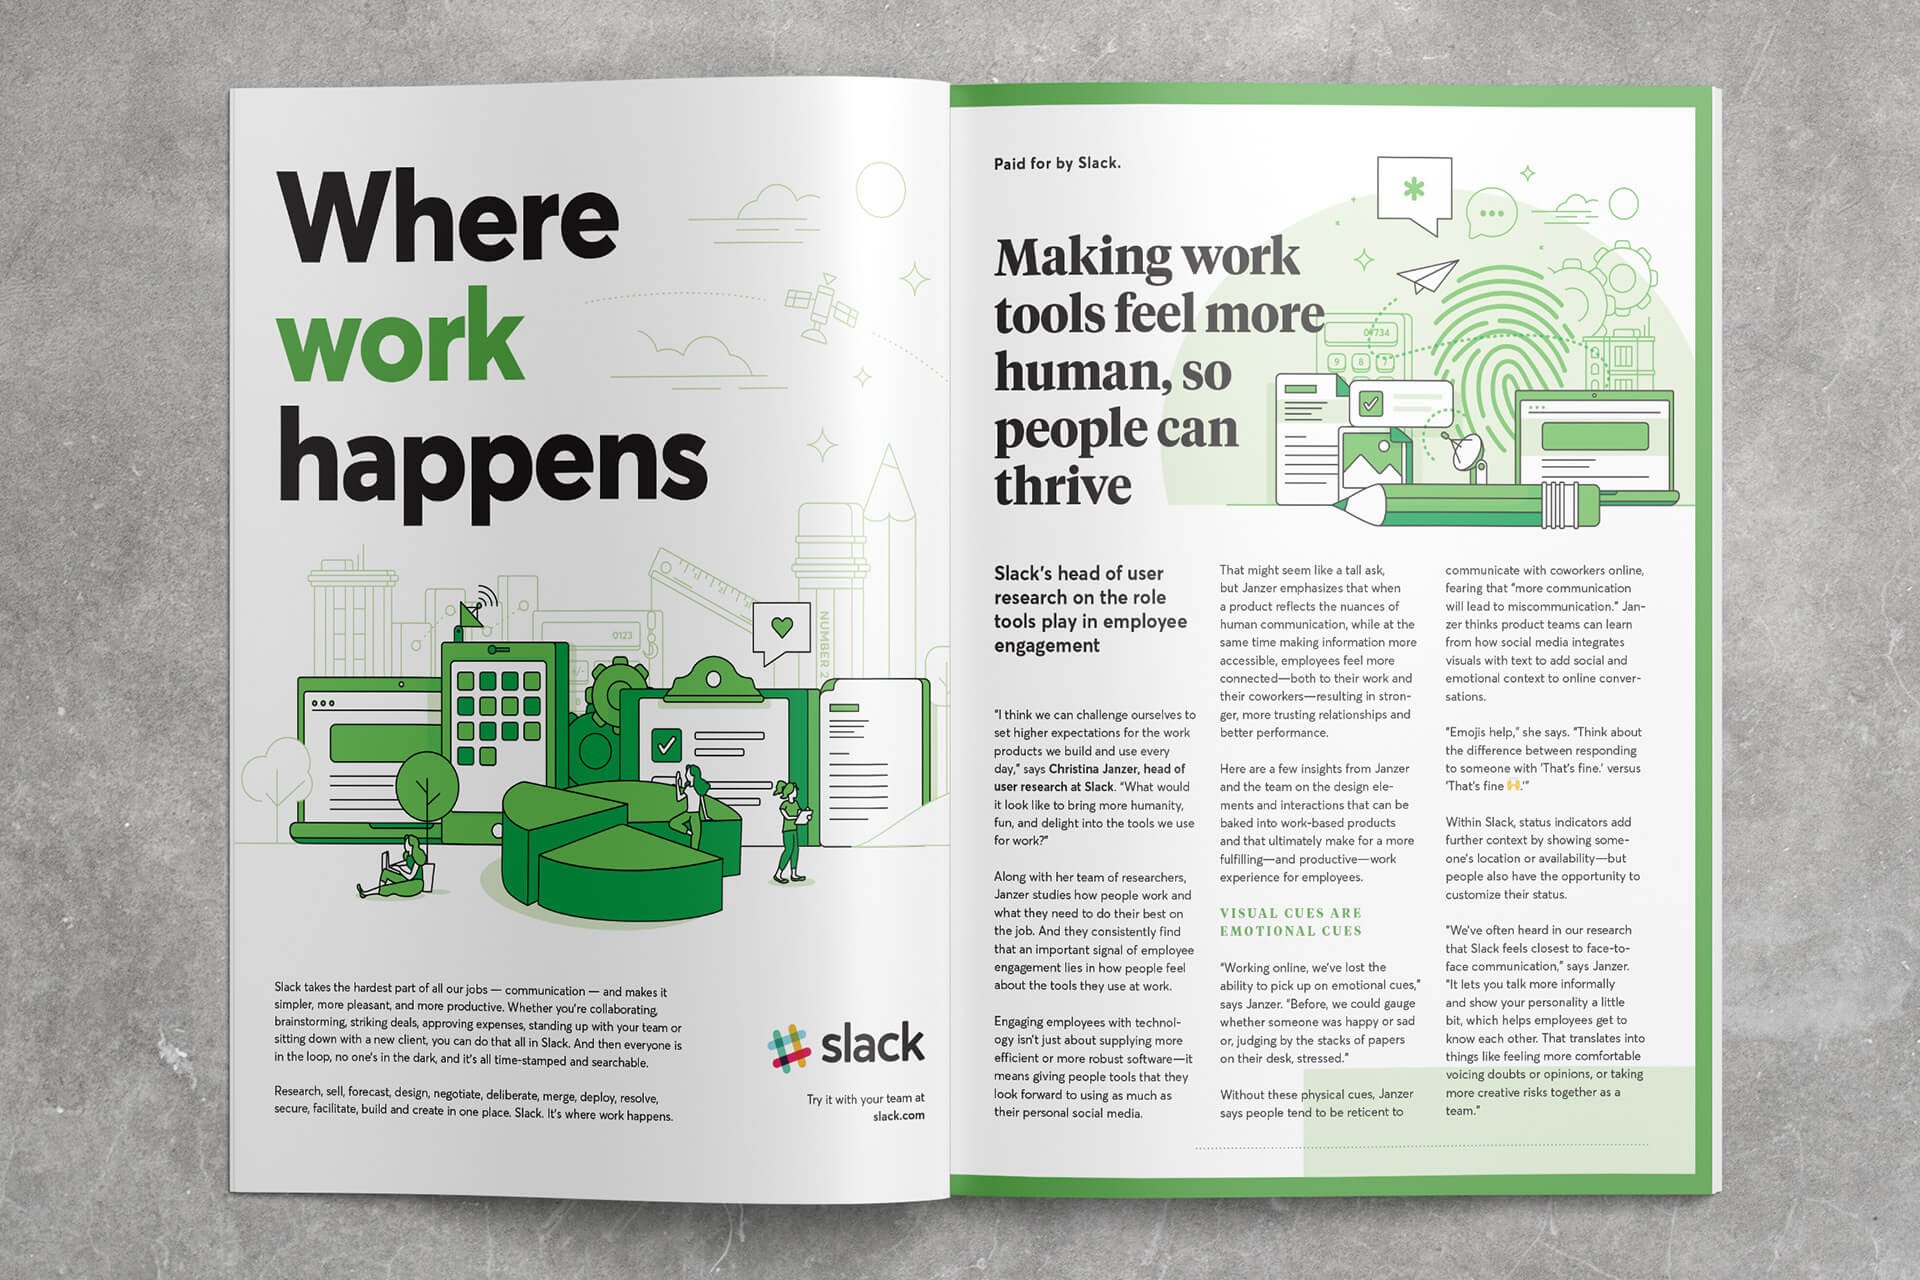 Where Work Happens advertorial gatefold in Fast Company